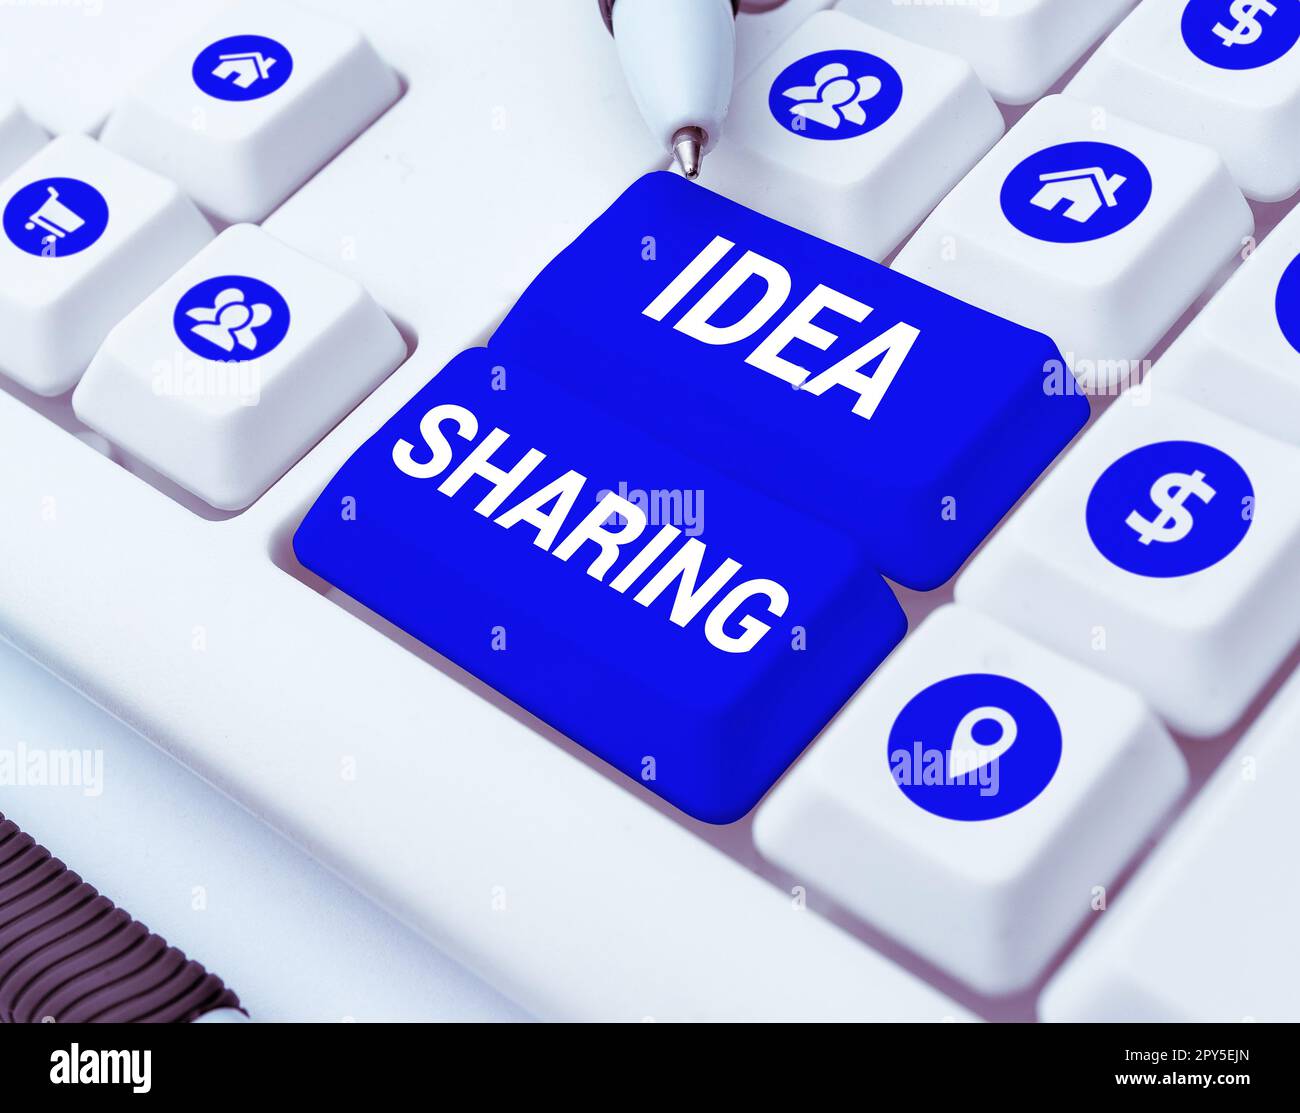 Text caption presenting Idea Sharing. Business idea Startup launch innovation product, creative thinking Stock Photo